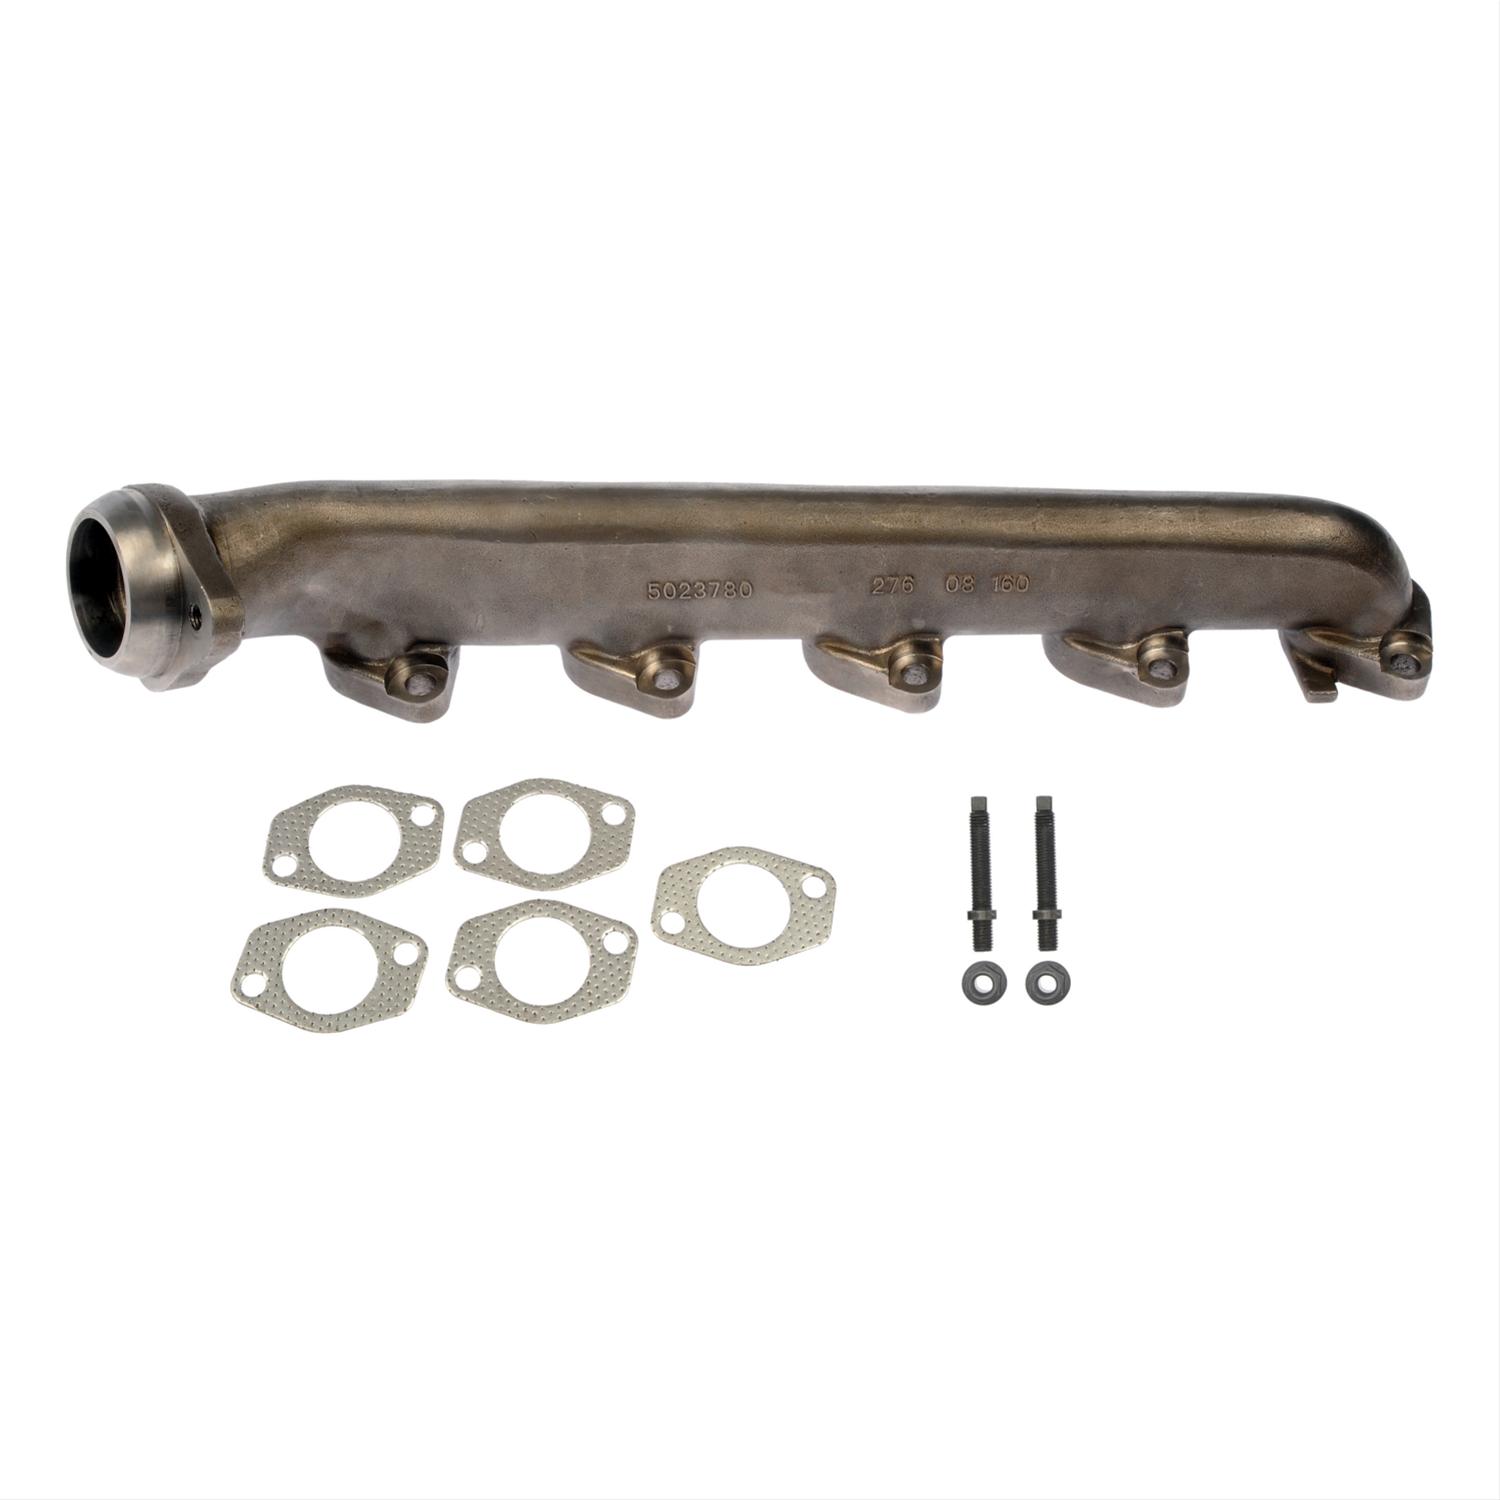 Cast exhaust ford iron manifold